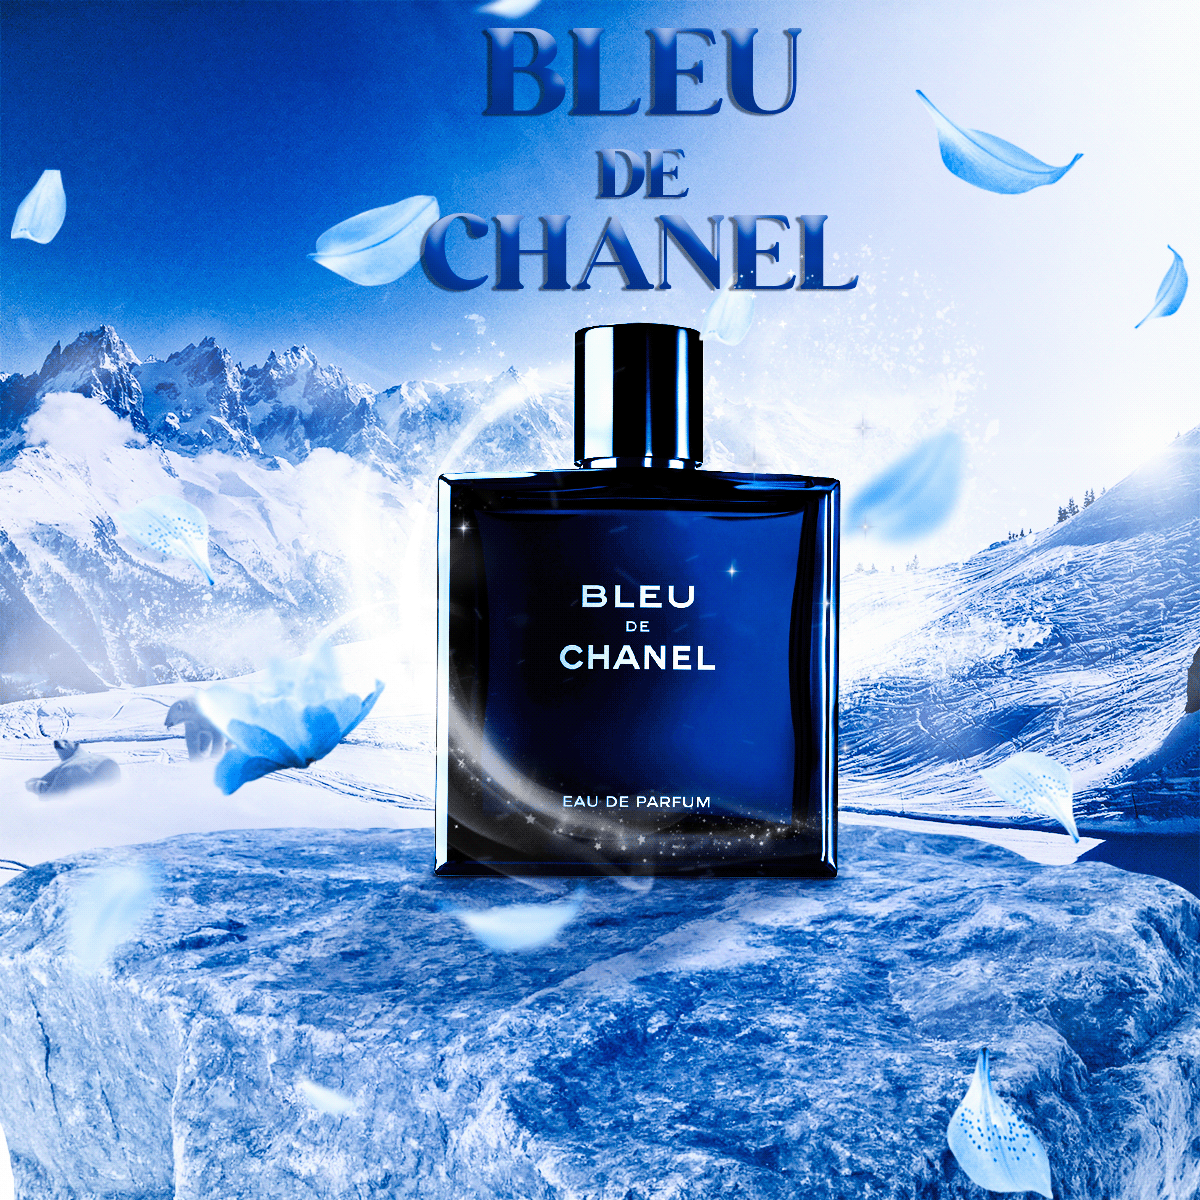 Graphic Designer Advertising  perfume beauty bleu de chanel Beauty Products Style Fashion  model beutiful